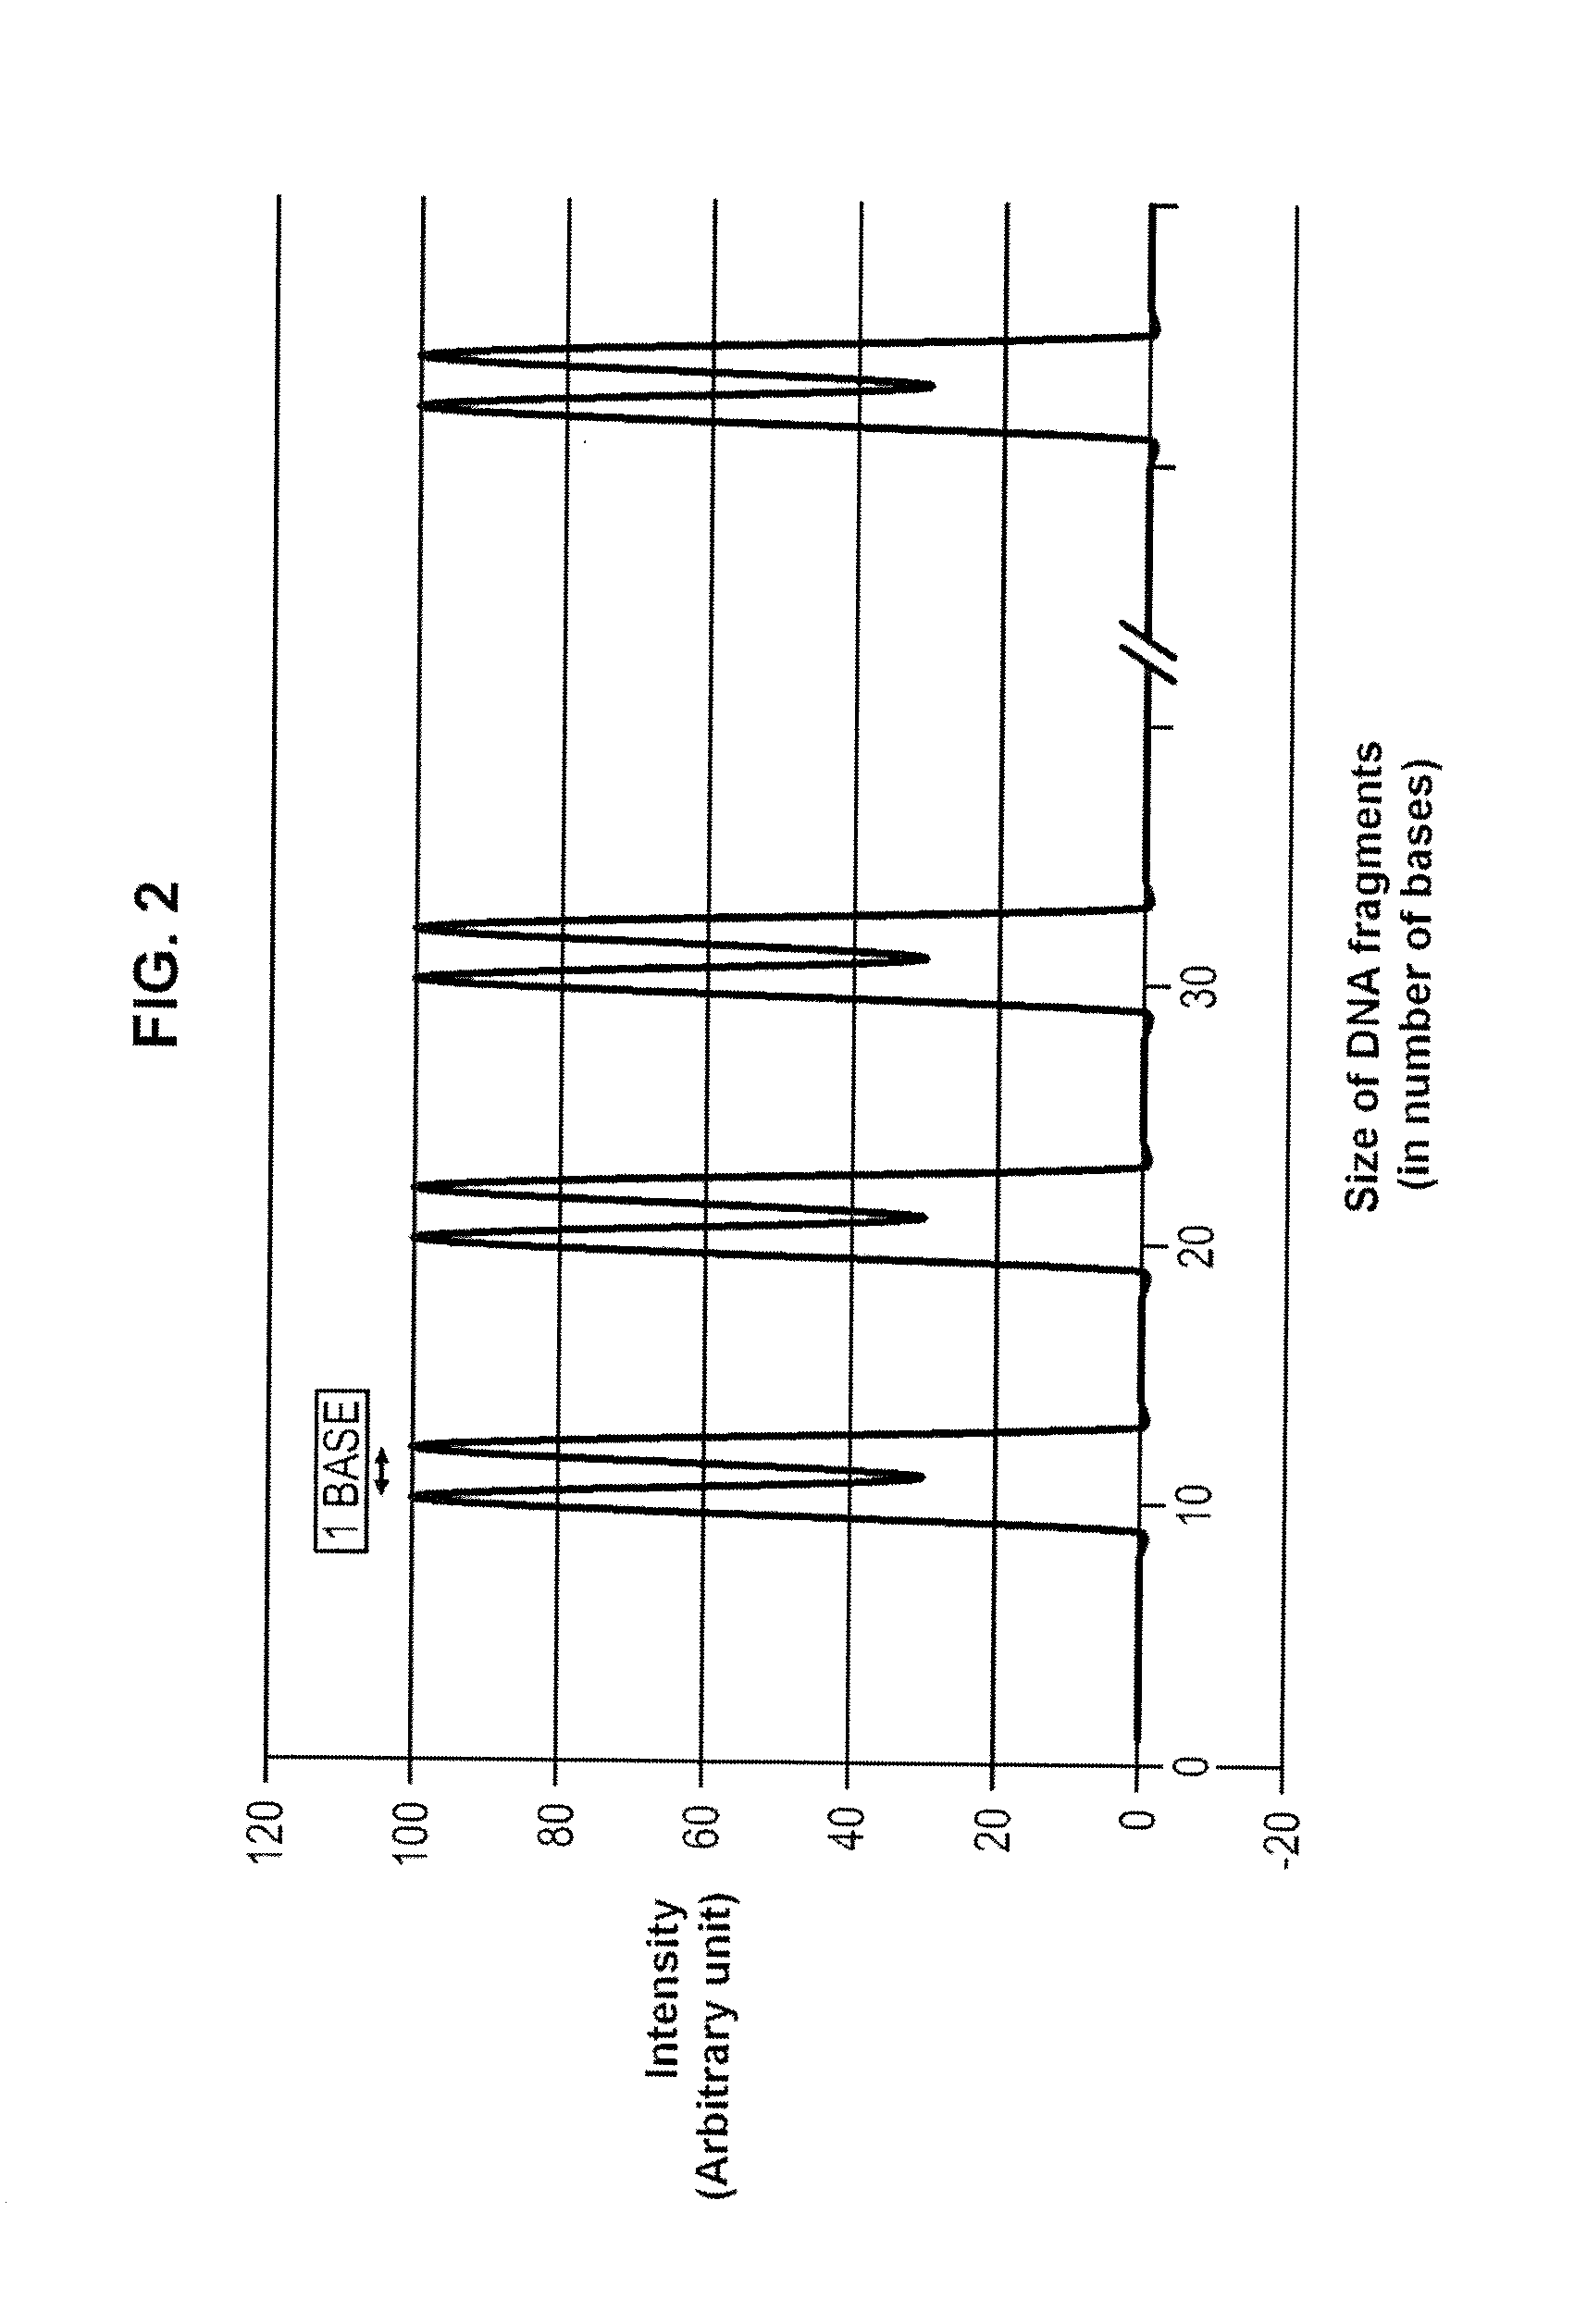 Size marker and method for controlling the resolution of an electropherogram